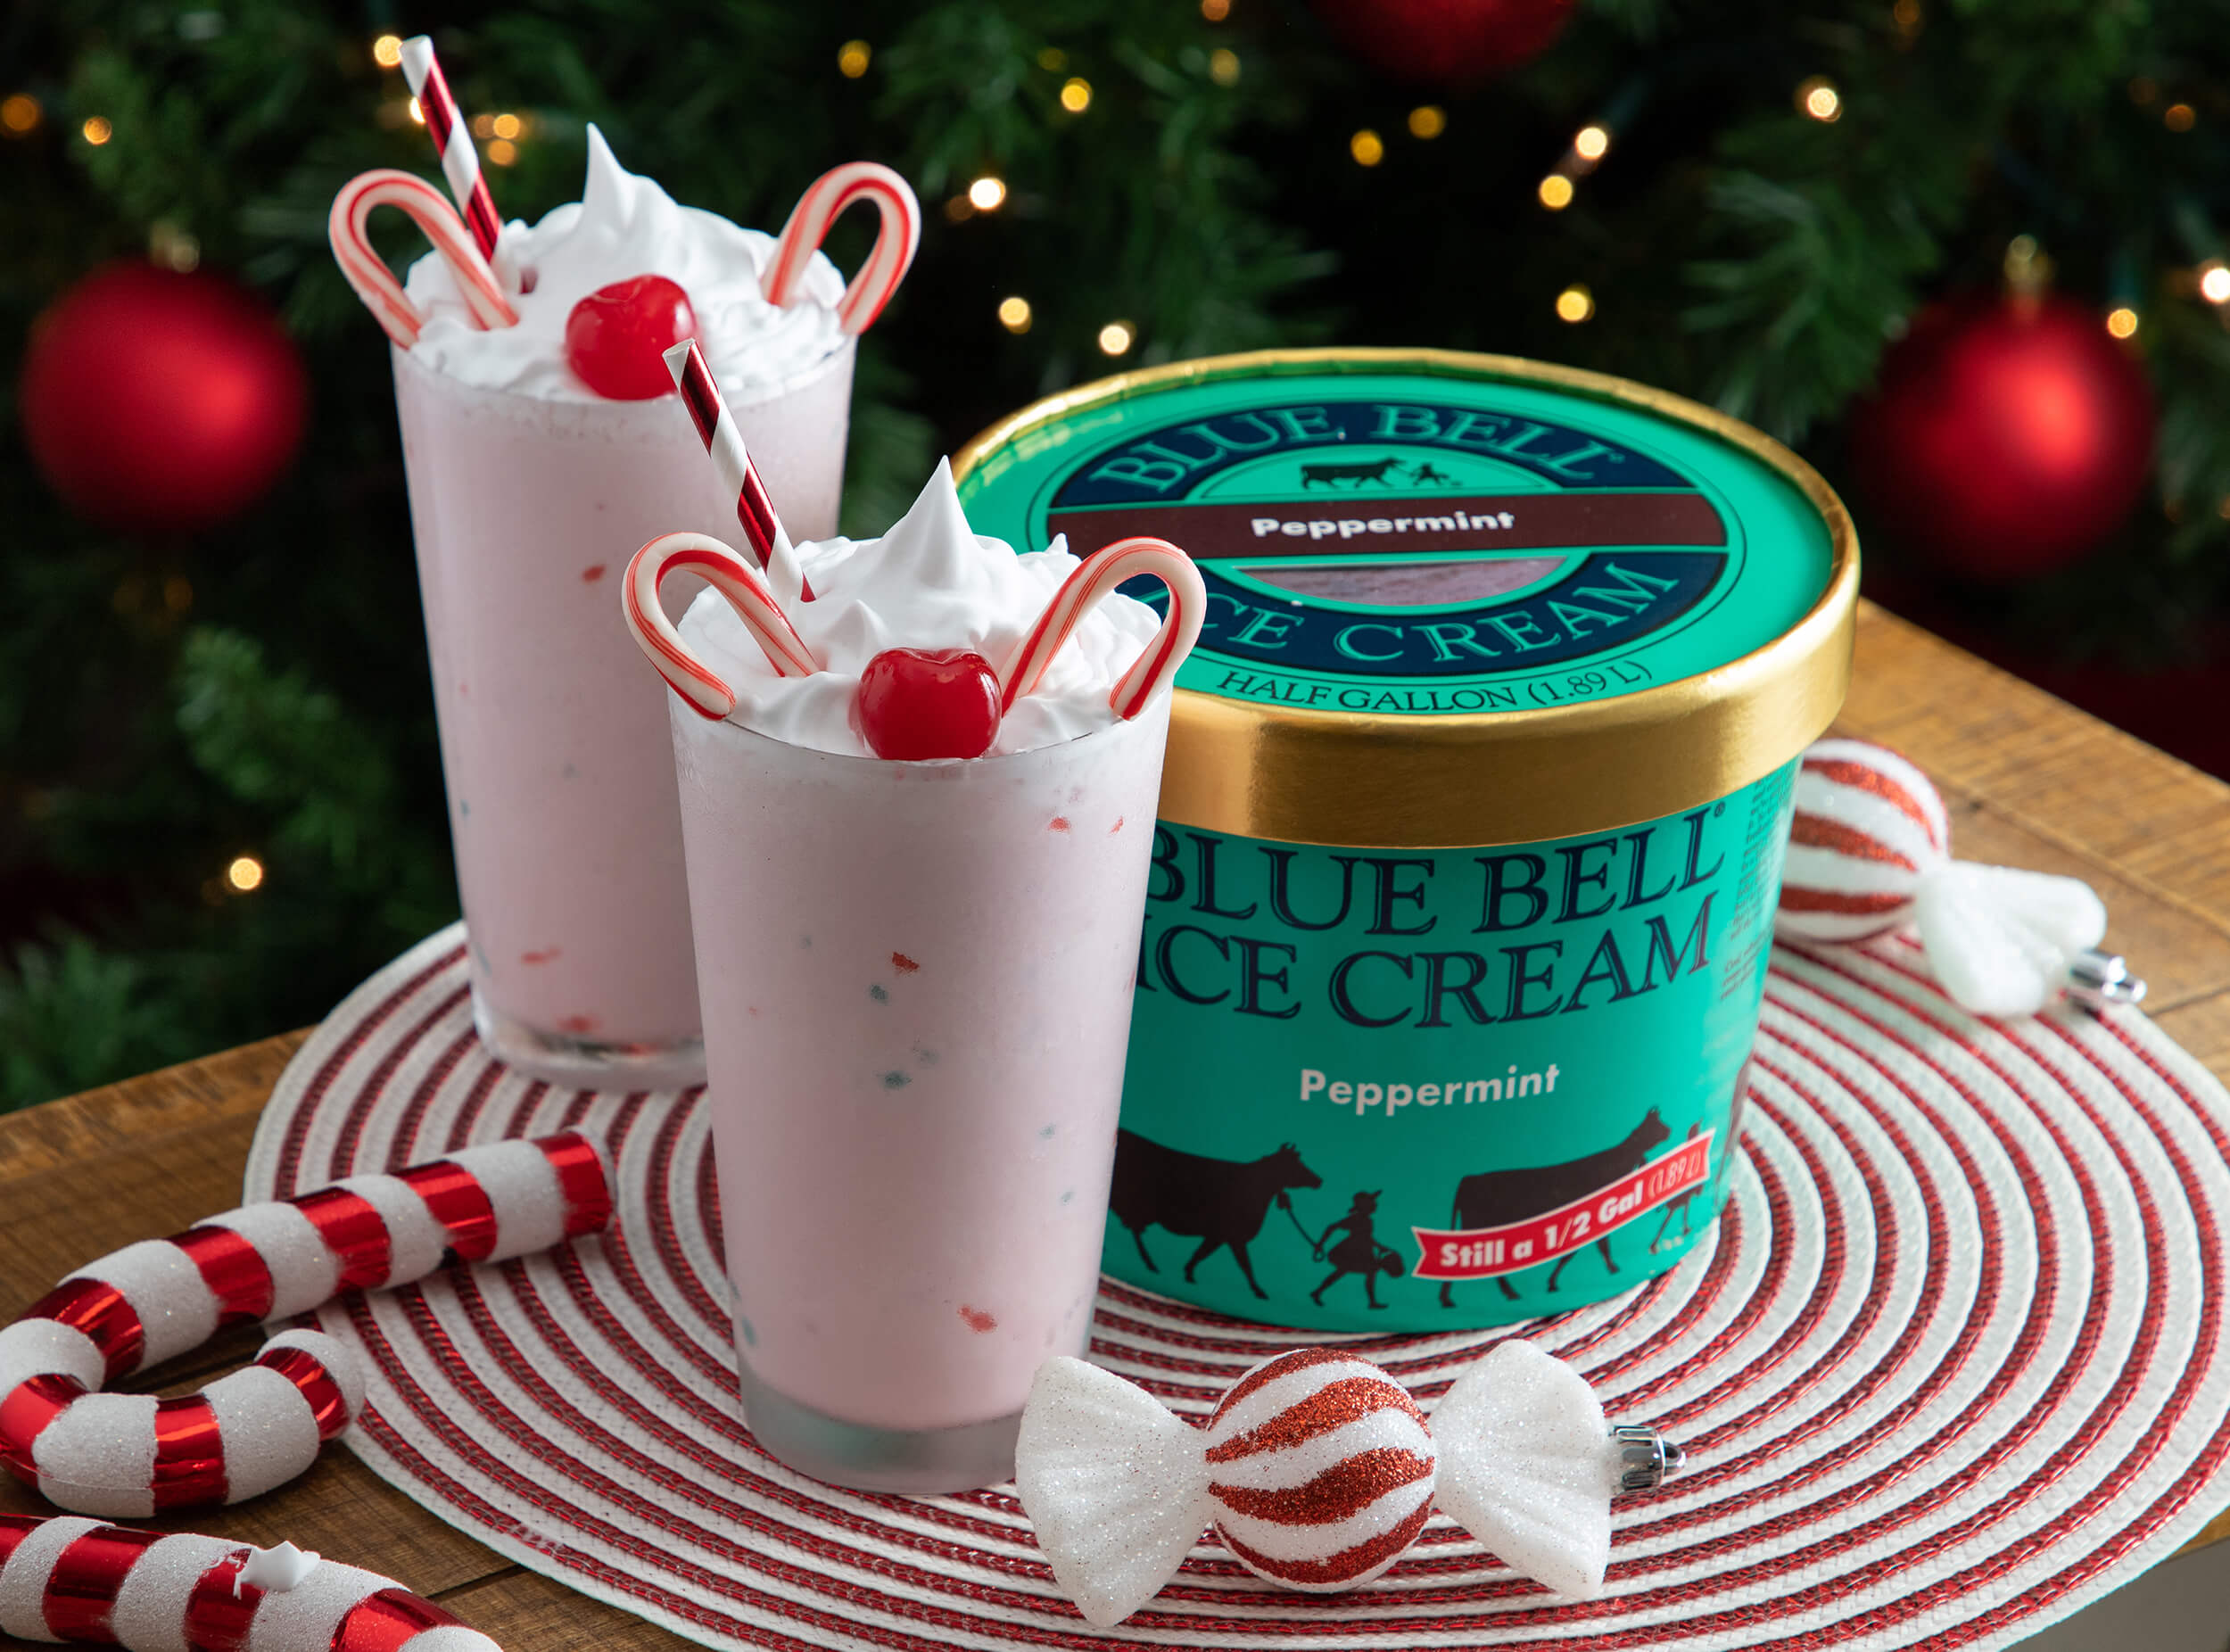 Blue Bell Peppermint Ice Cream Reindeer Milkshakes garnished with cherries and candy canes.